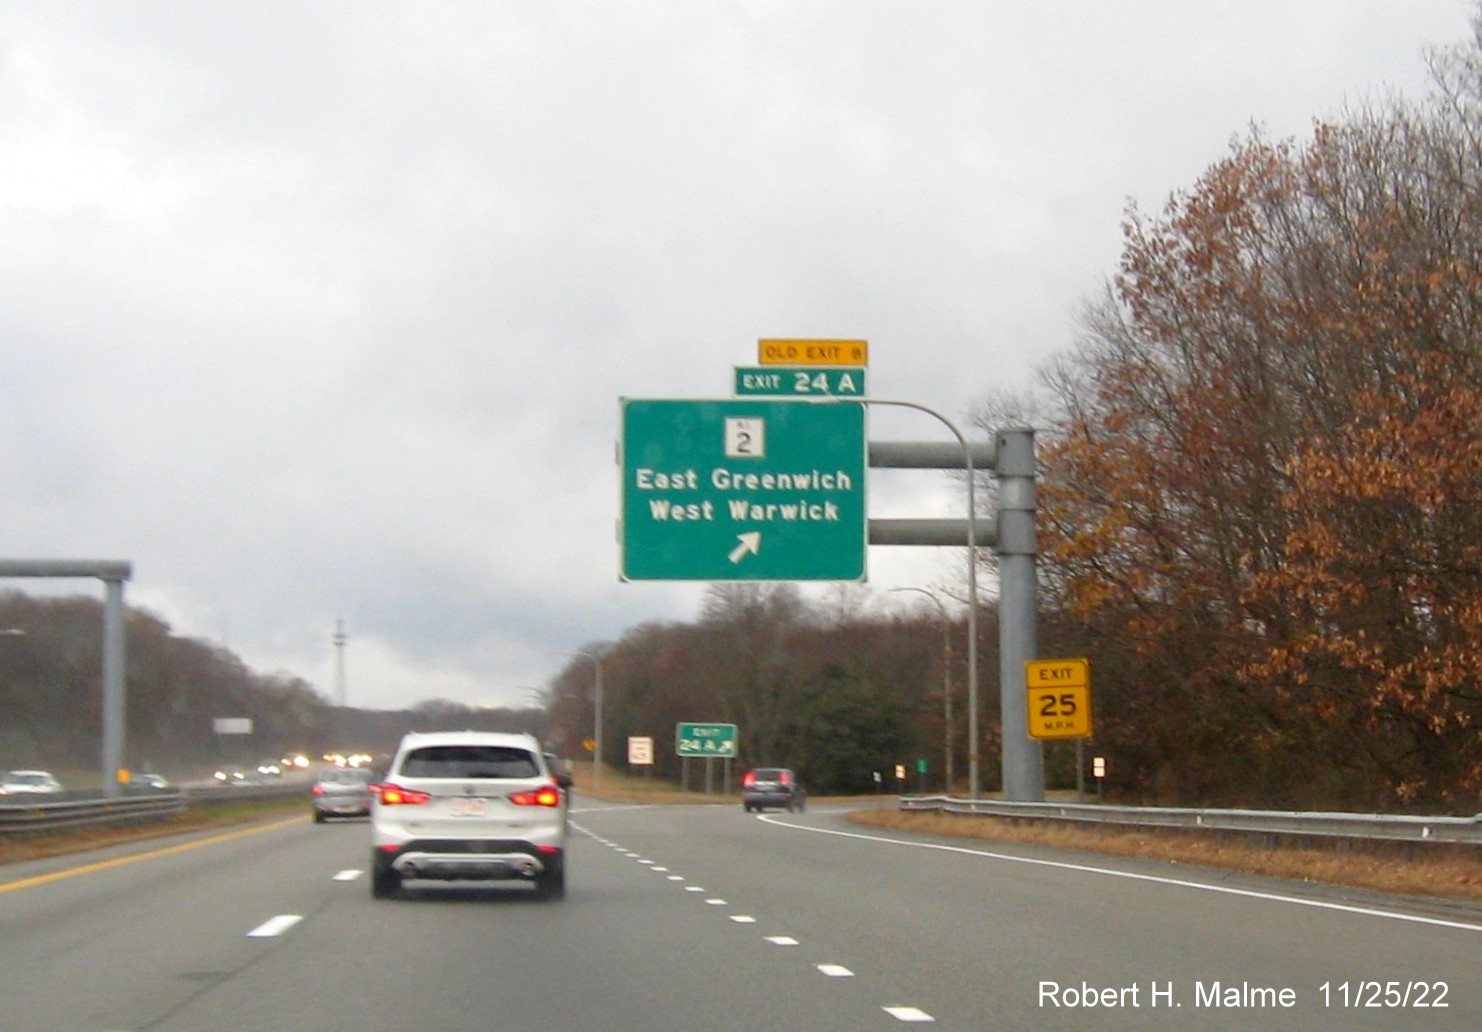 Image of overhead ramp sign for RI 2 exit with new milepost based exit number and yellow Old Exit 8 sign over exit tab on I-95 South in West Warwick, November 2022